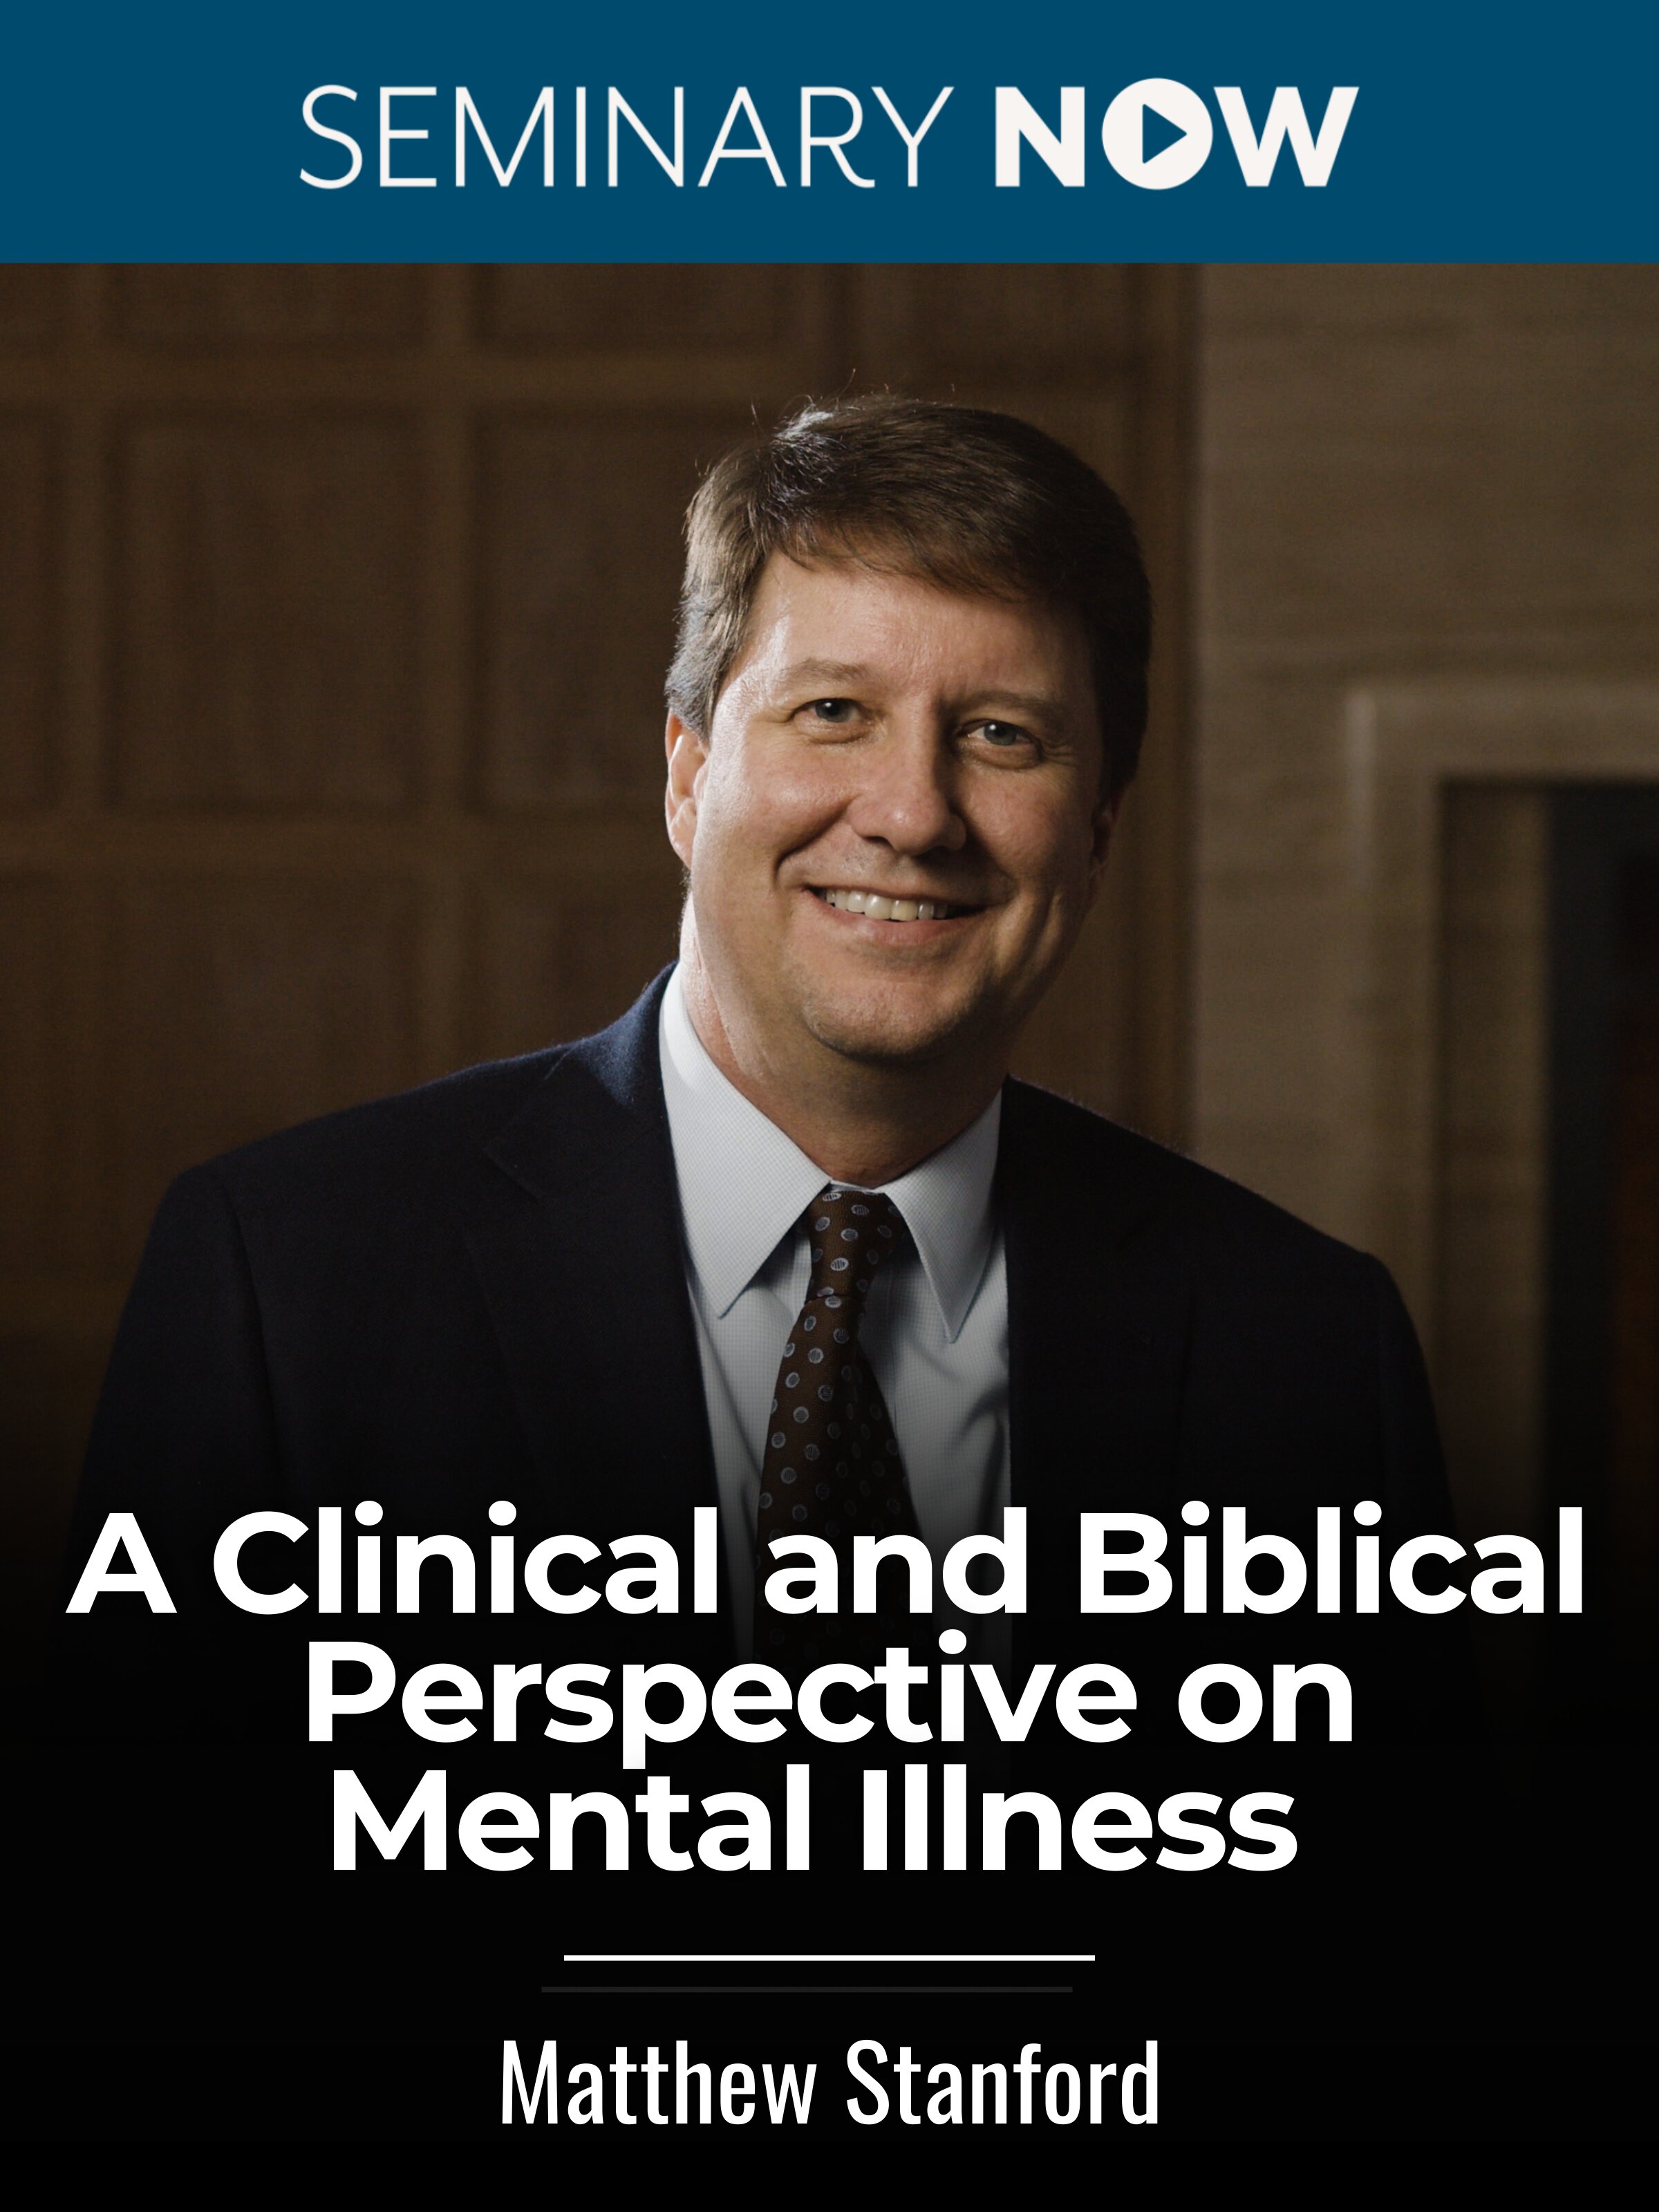 A Clinical and Biblical Perspective on Mental Illness